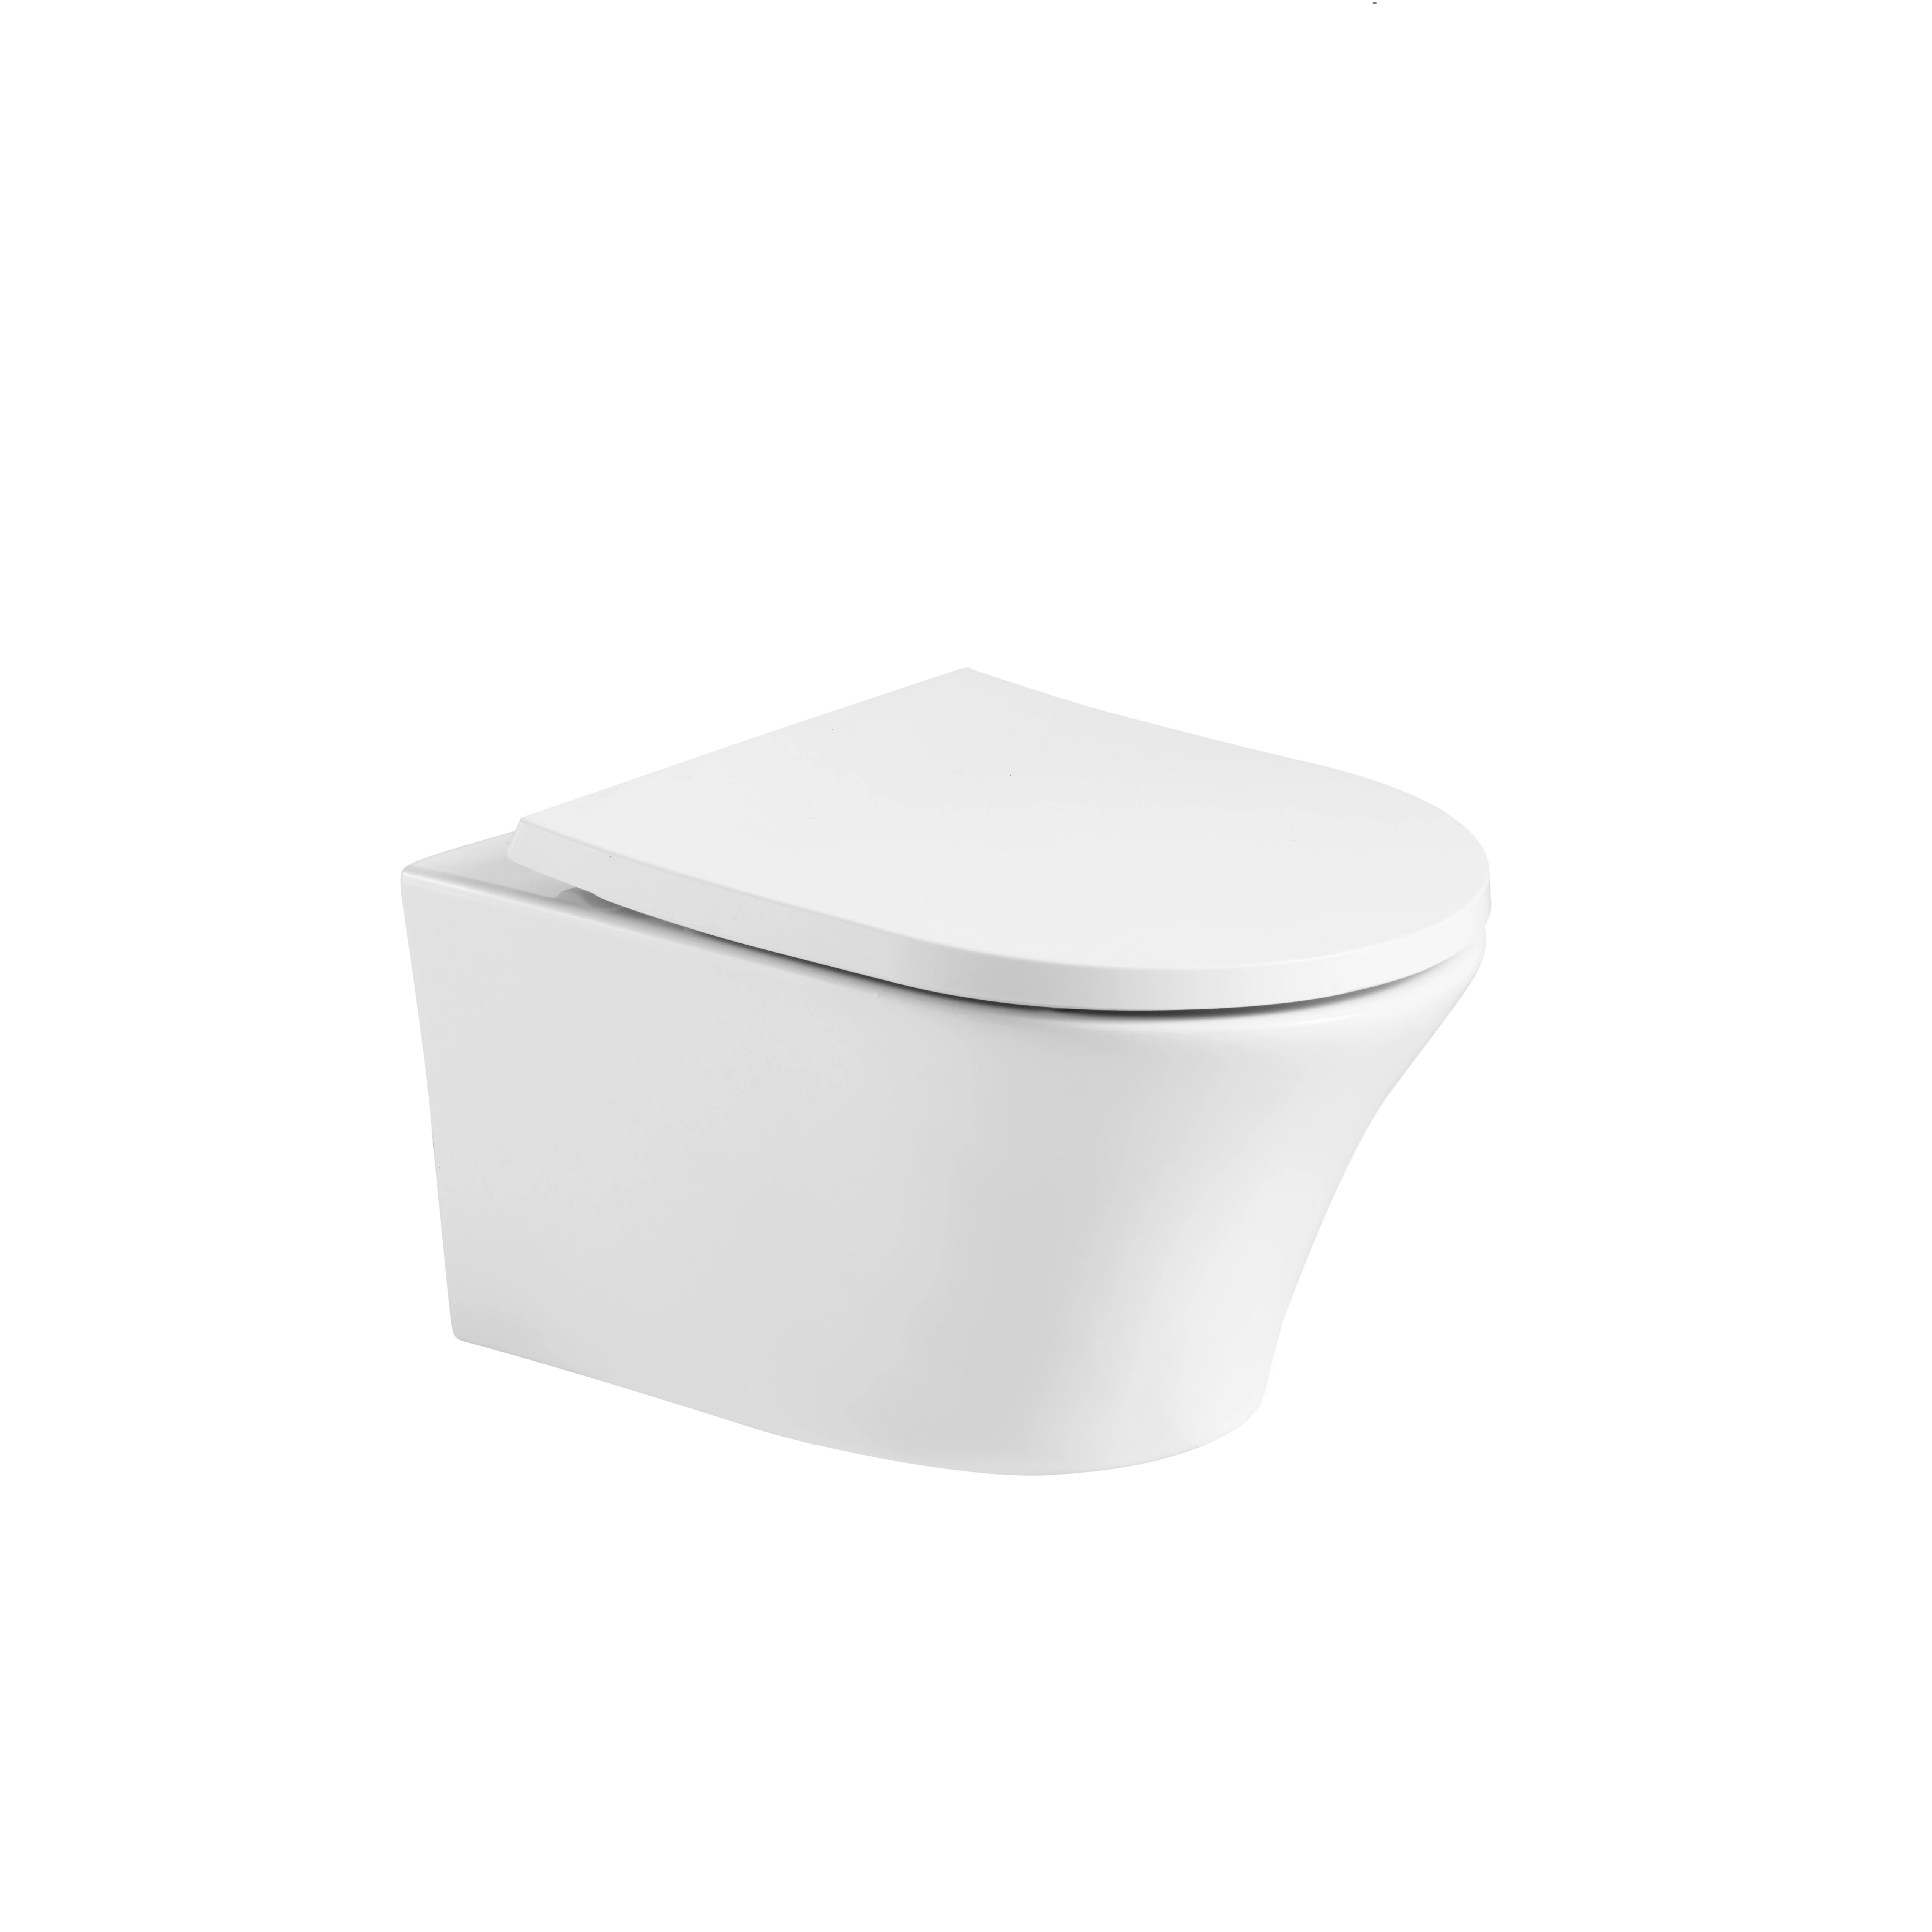 
ANBI New Design Ceramic Wall Mount Toilet Bowl Rimless Wall Hung Toilet For Office Buildings Bathrooms 